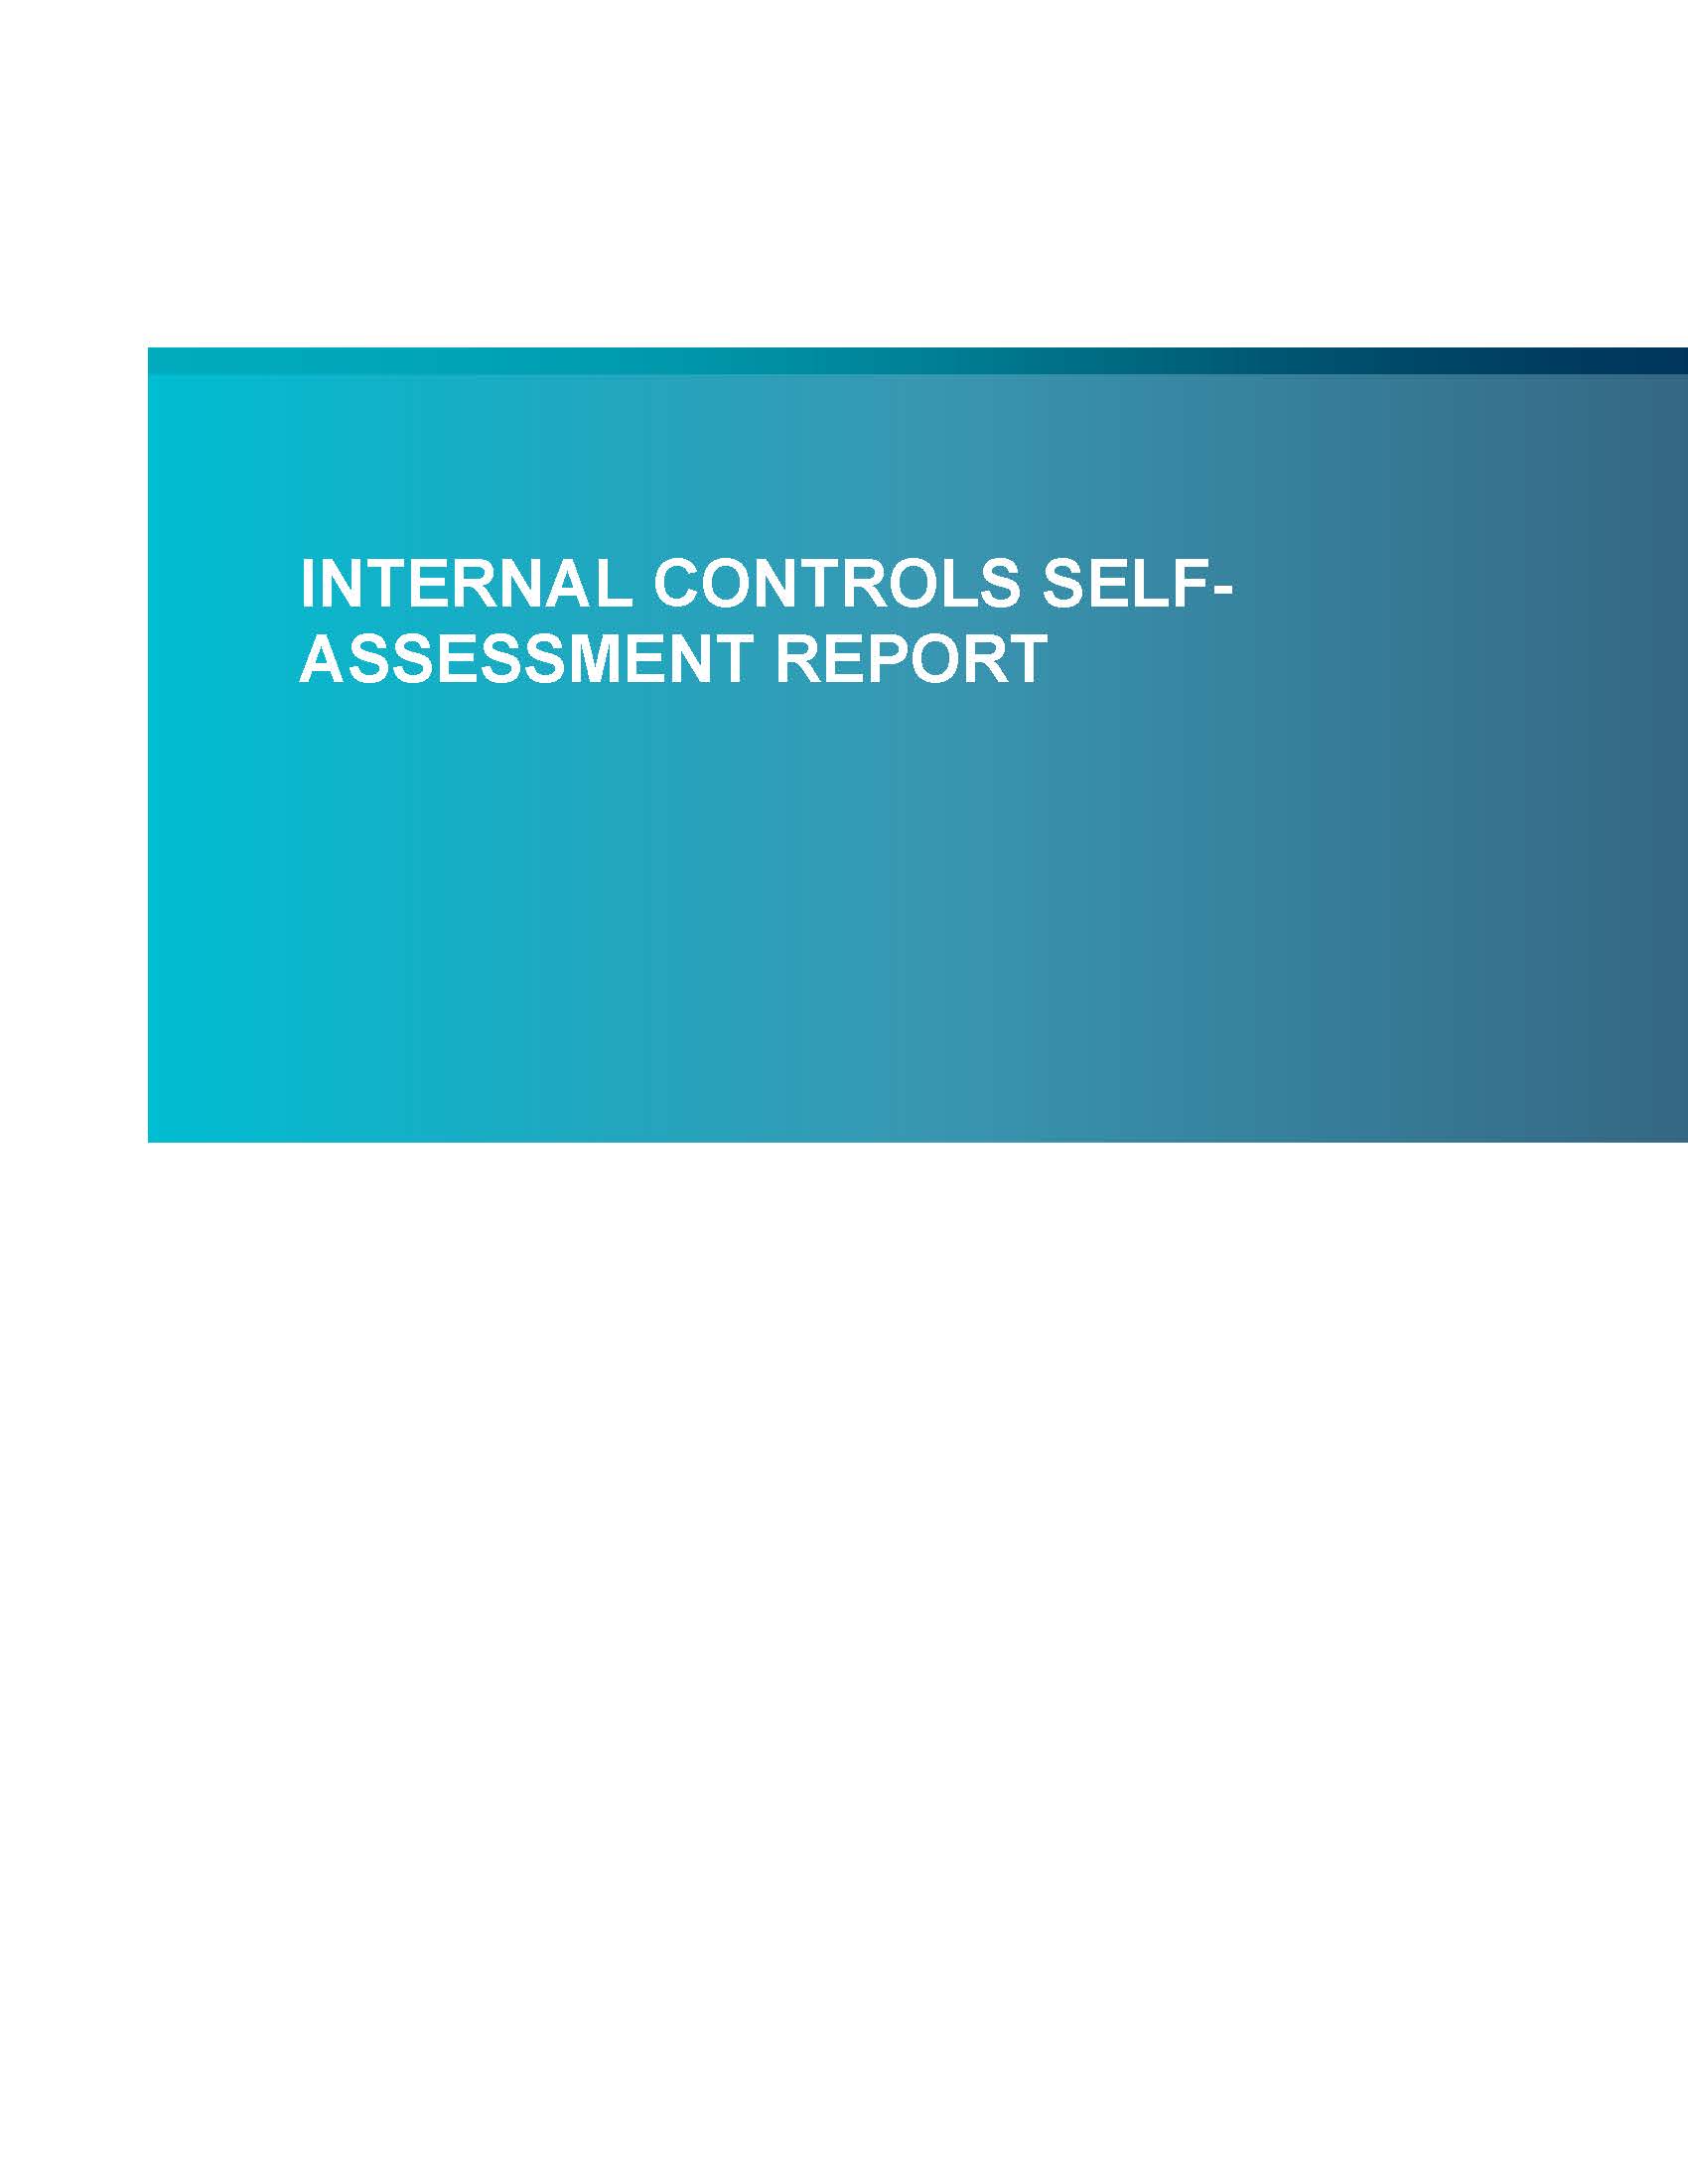 Screenshot of the first page of Internal Controls Self-Assessment Report